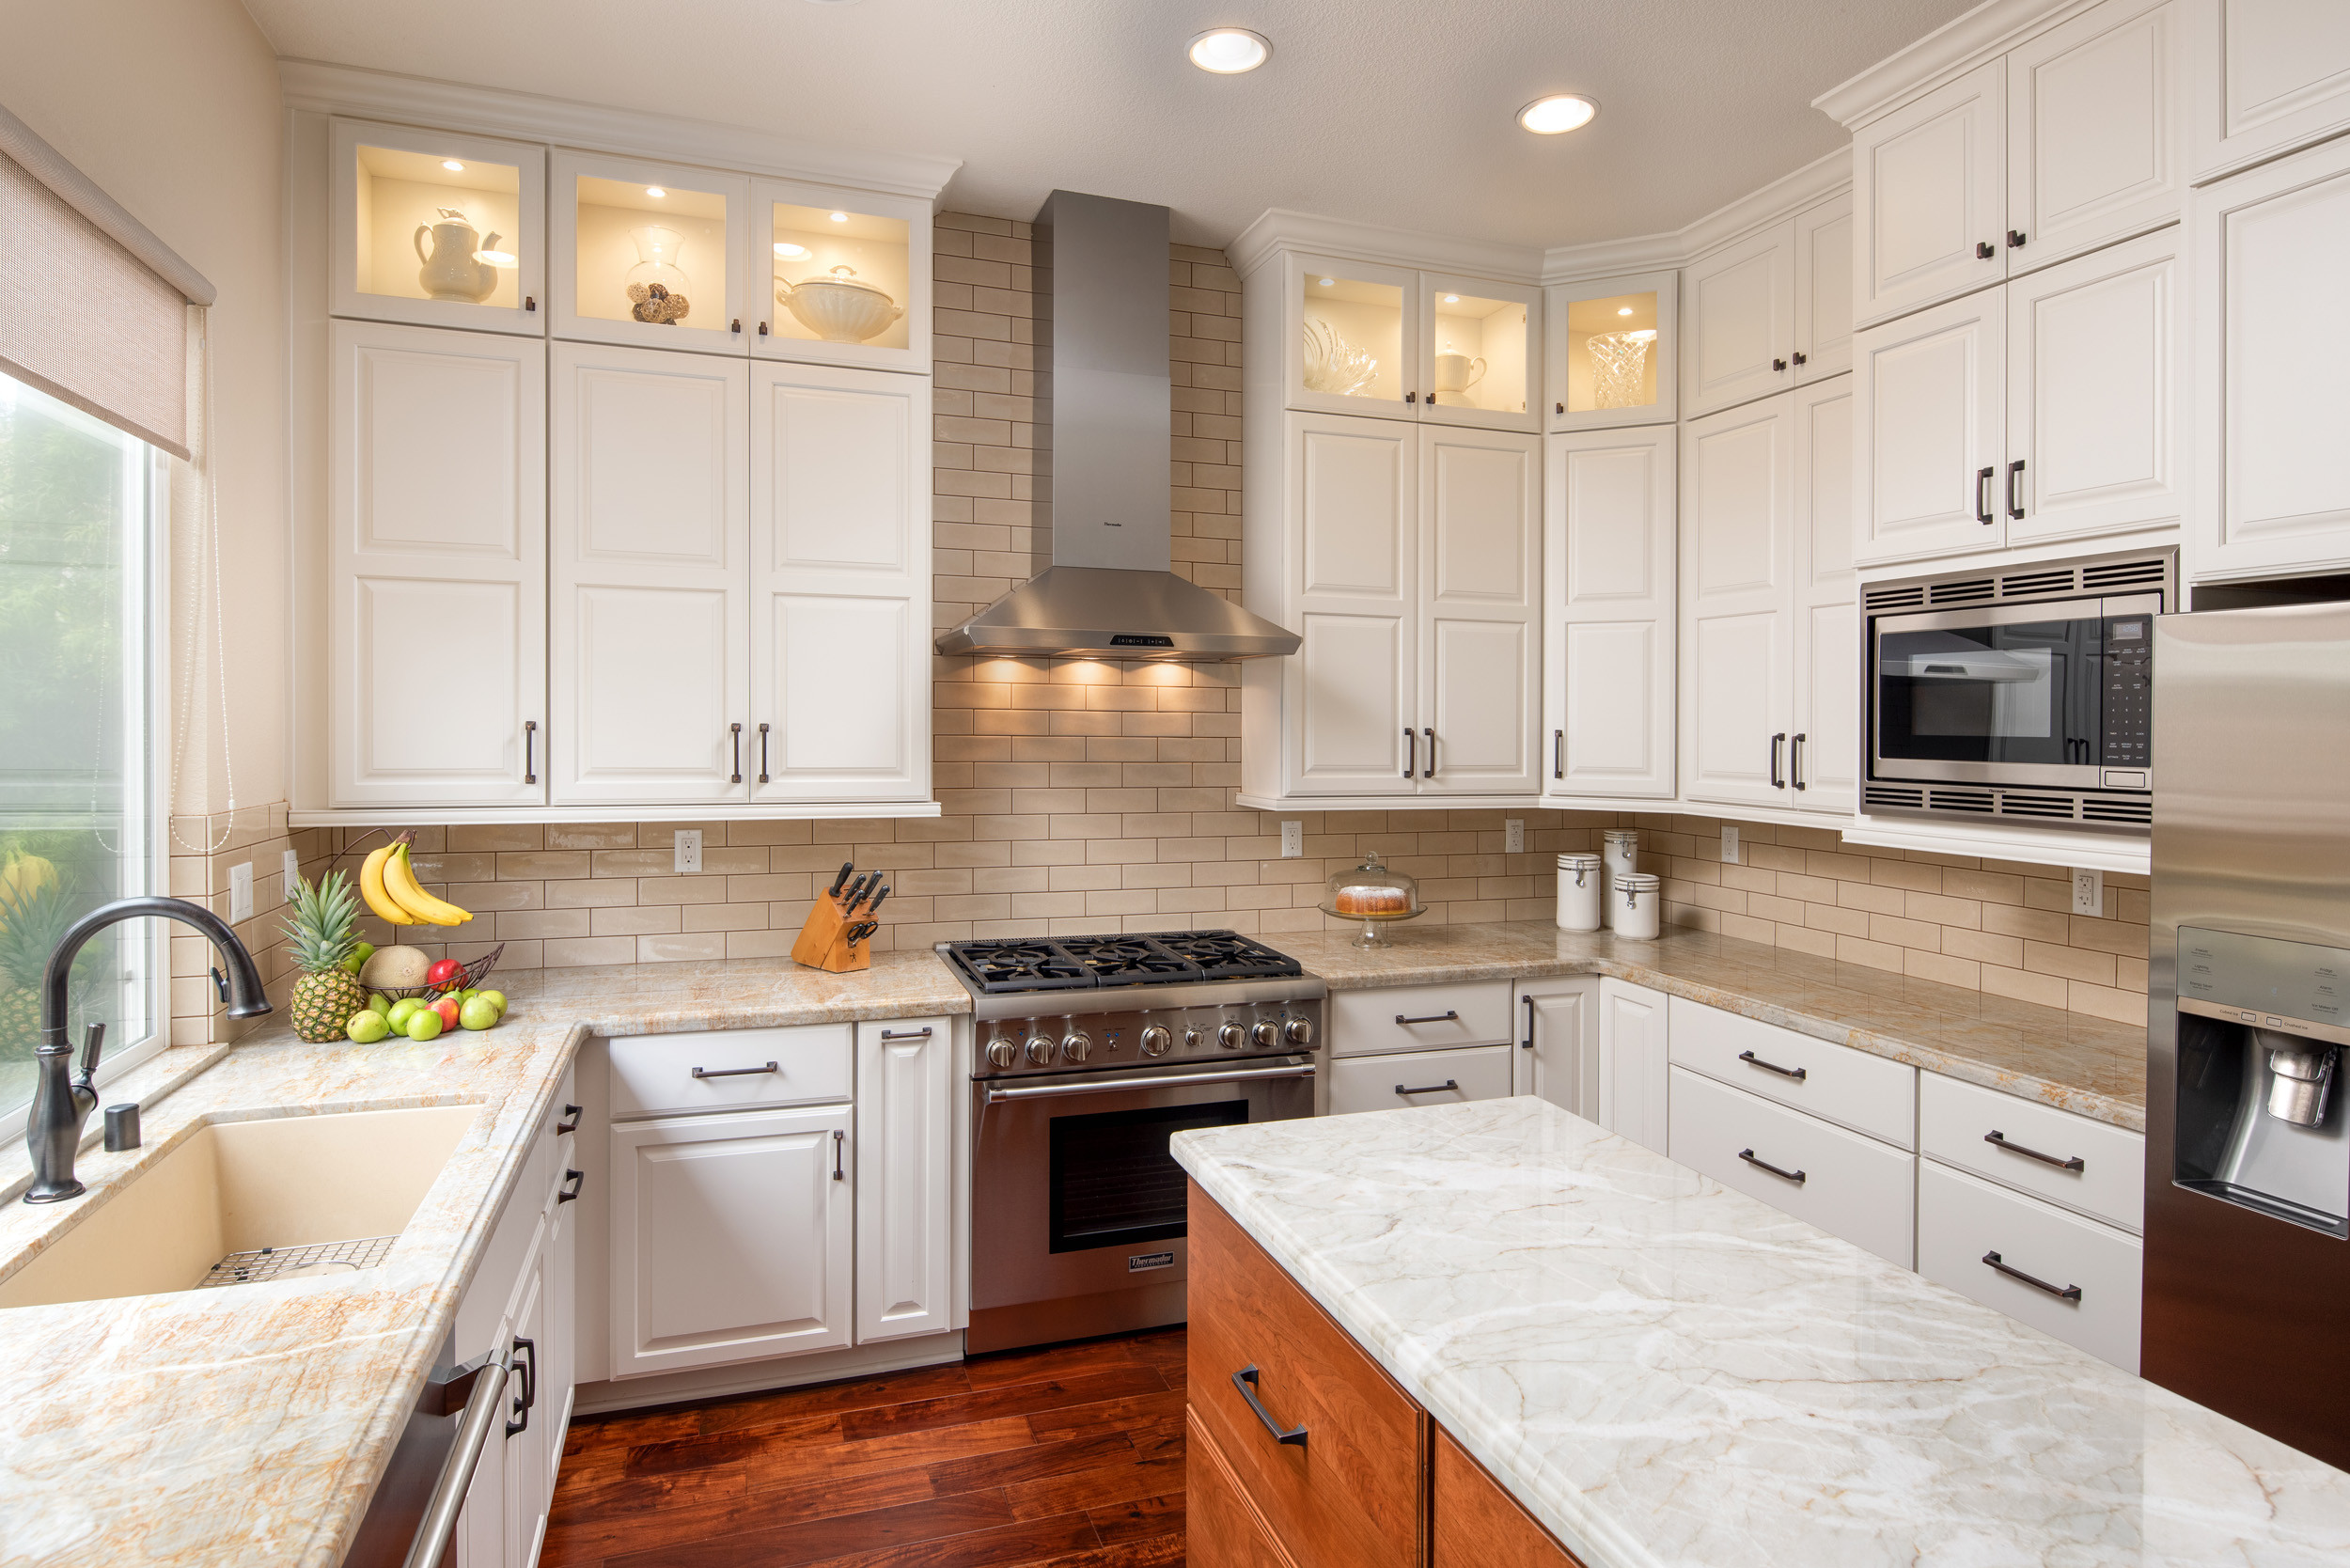 Kitchen Remodel Ideas
 Home Remodeling Ideas & Gallery